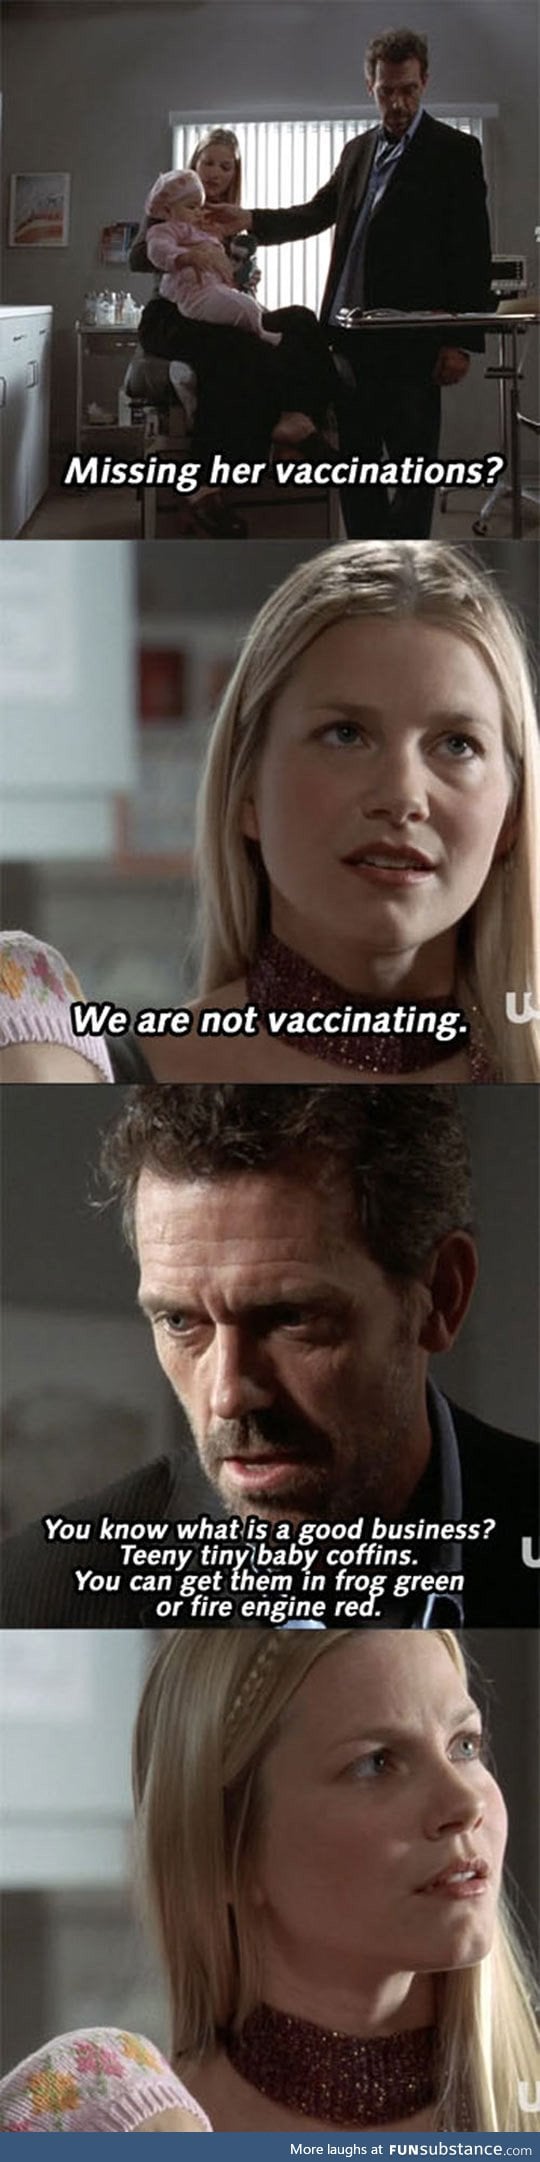 We are not vaccinating